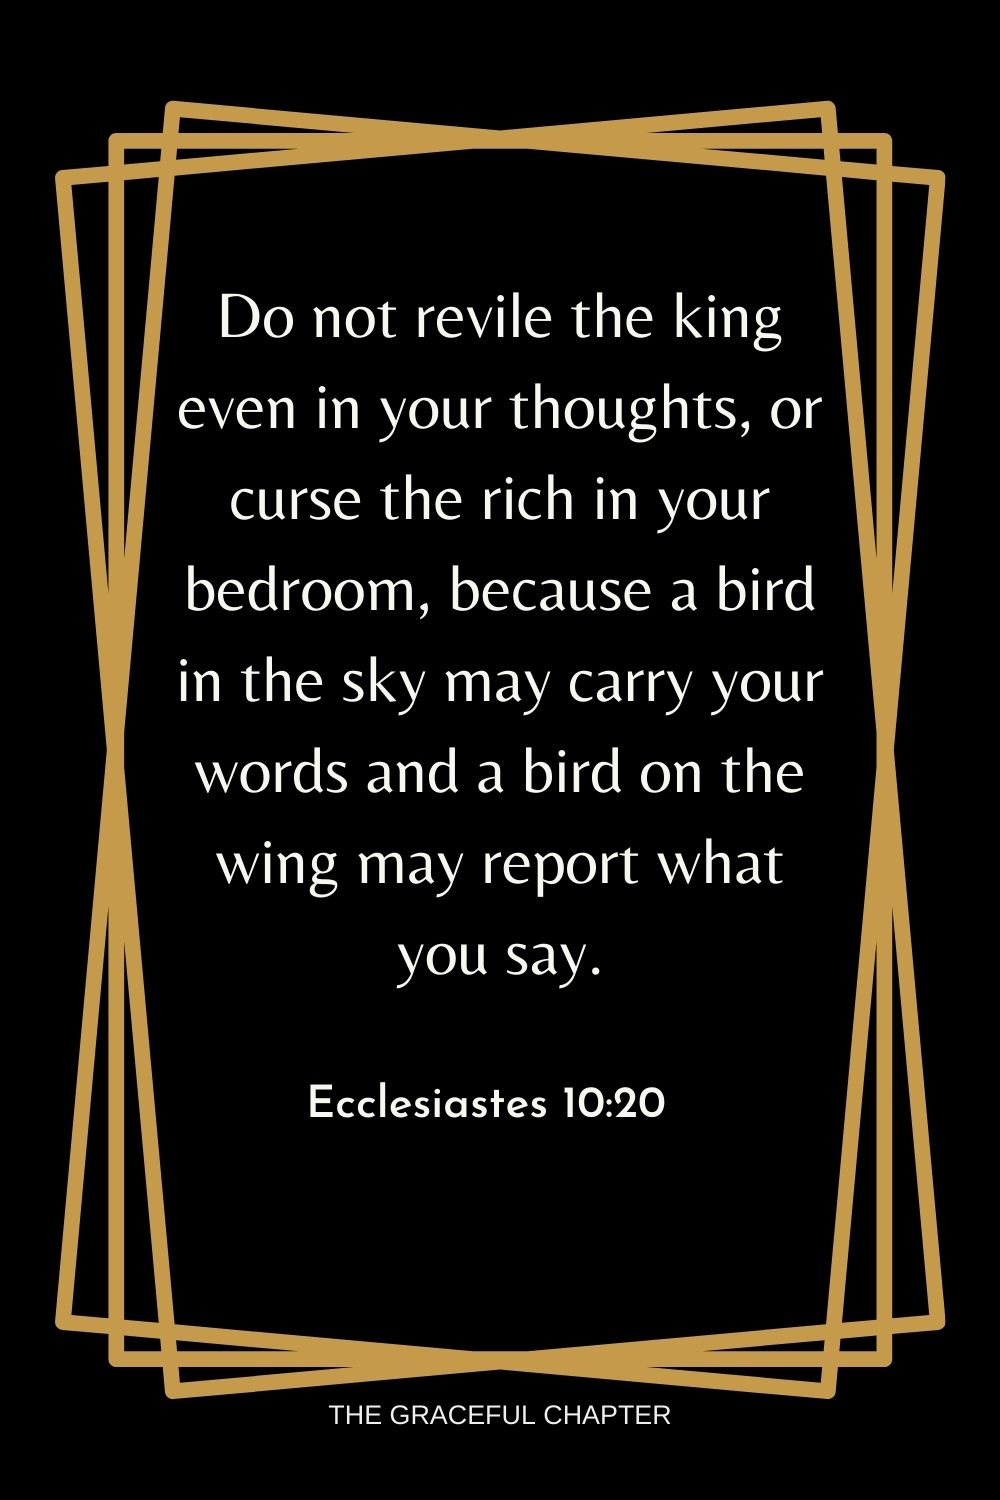 Do not revile the king even in your thoughts, or curse the rich in your bedroom, because a bird in the sky may carry your words and a bird on the wing may report what you say. Ecclesiastes 10:20